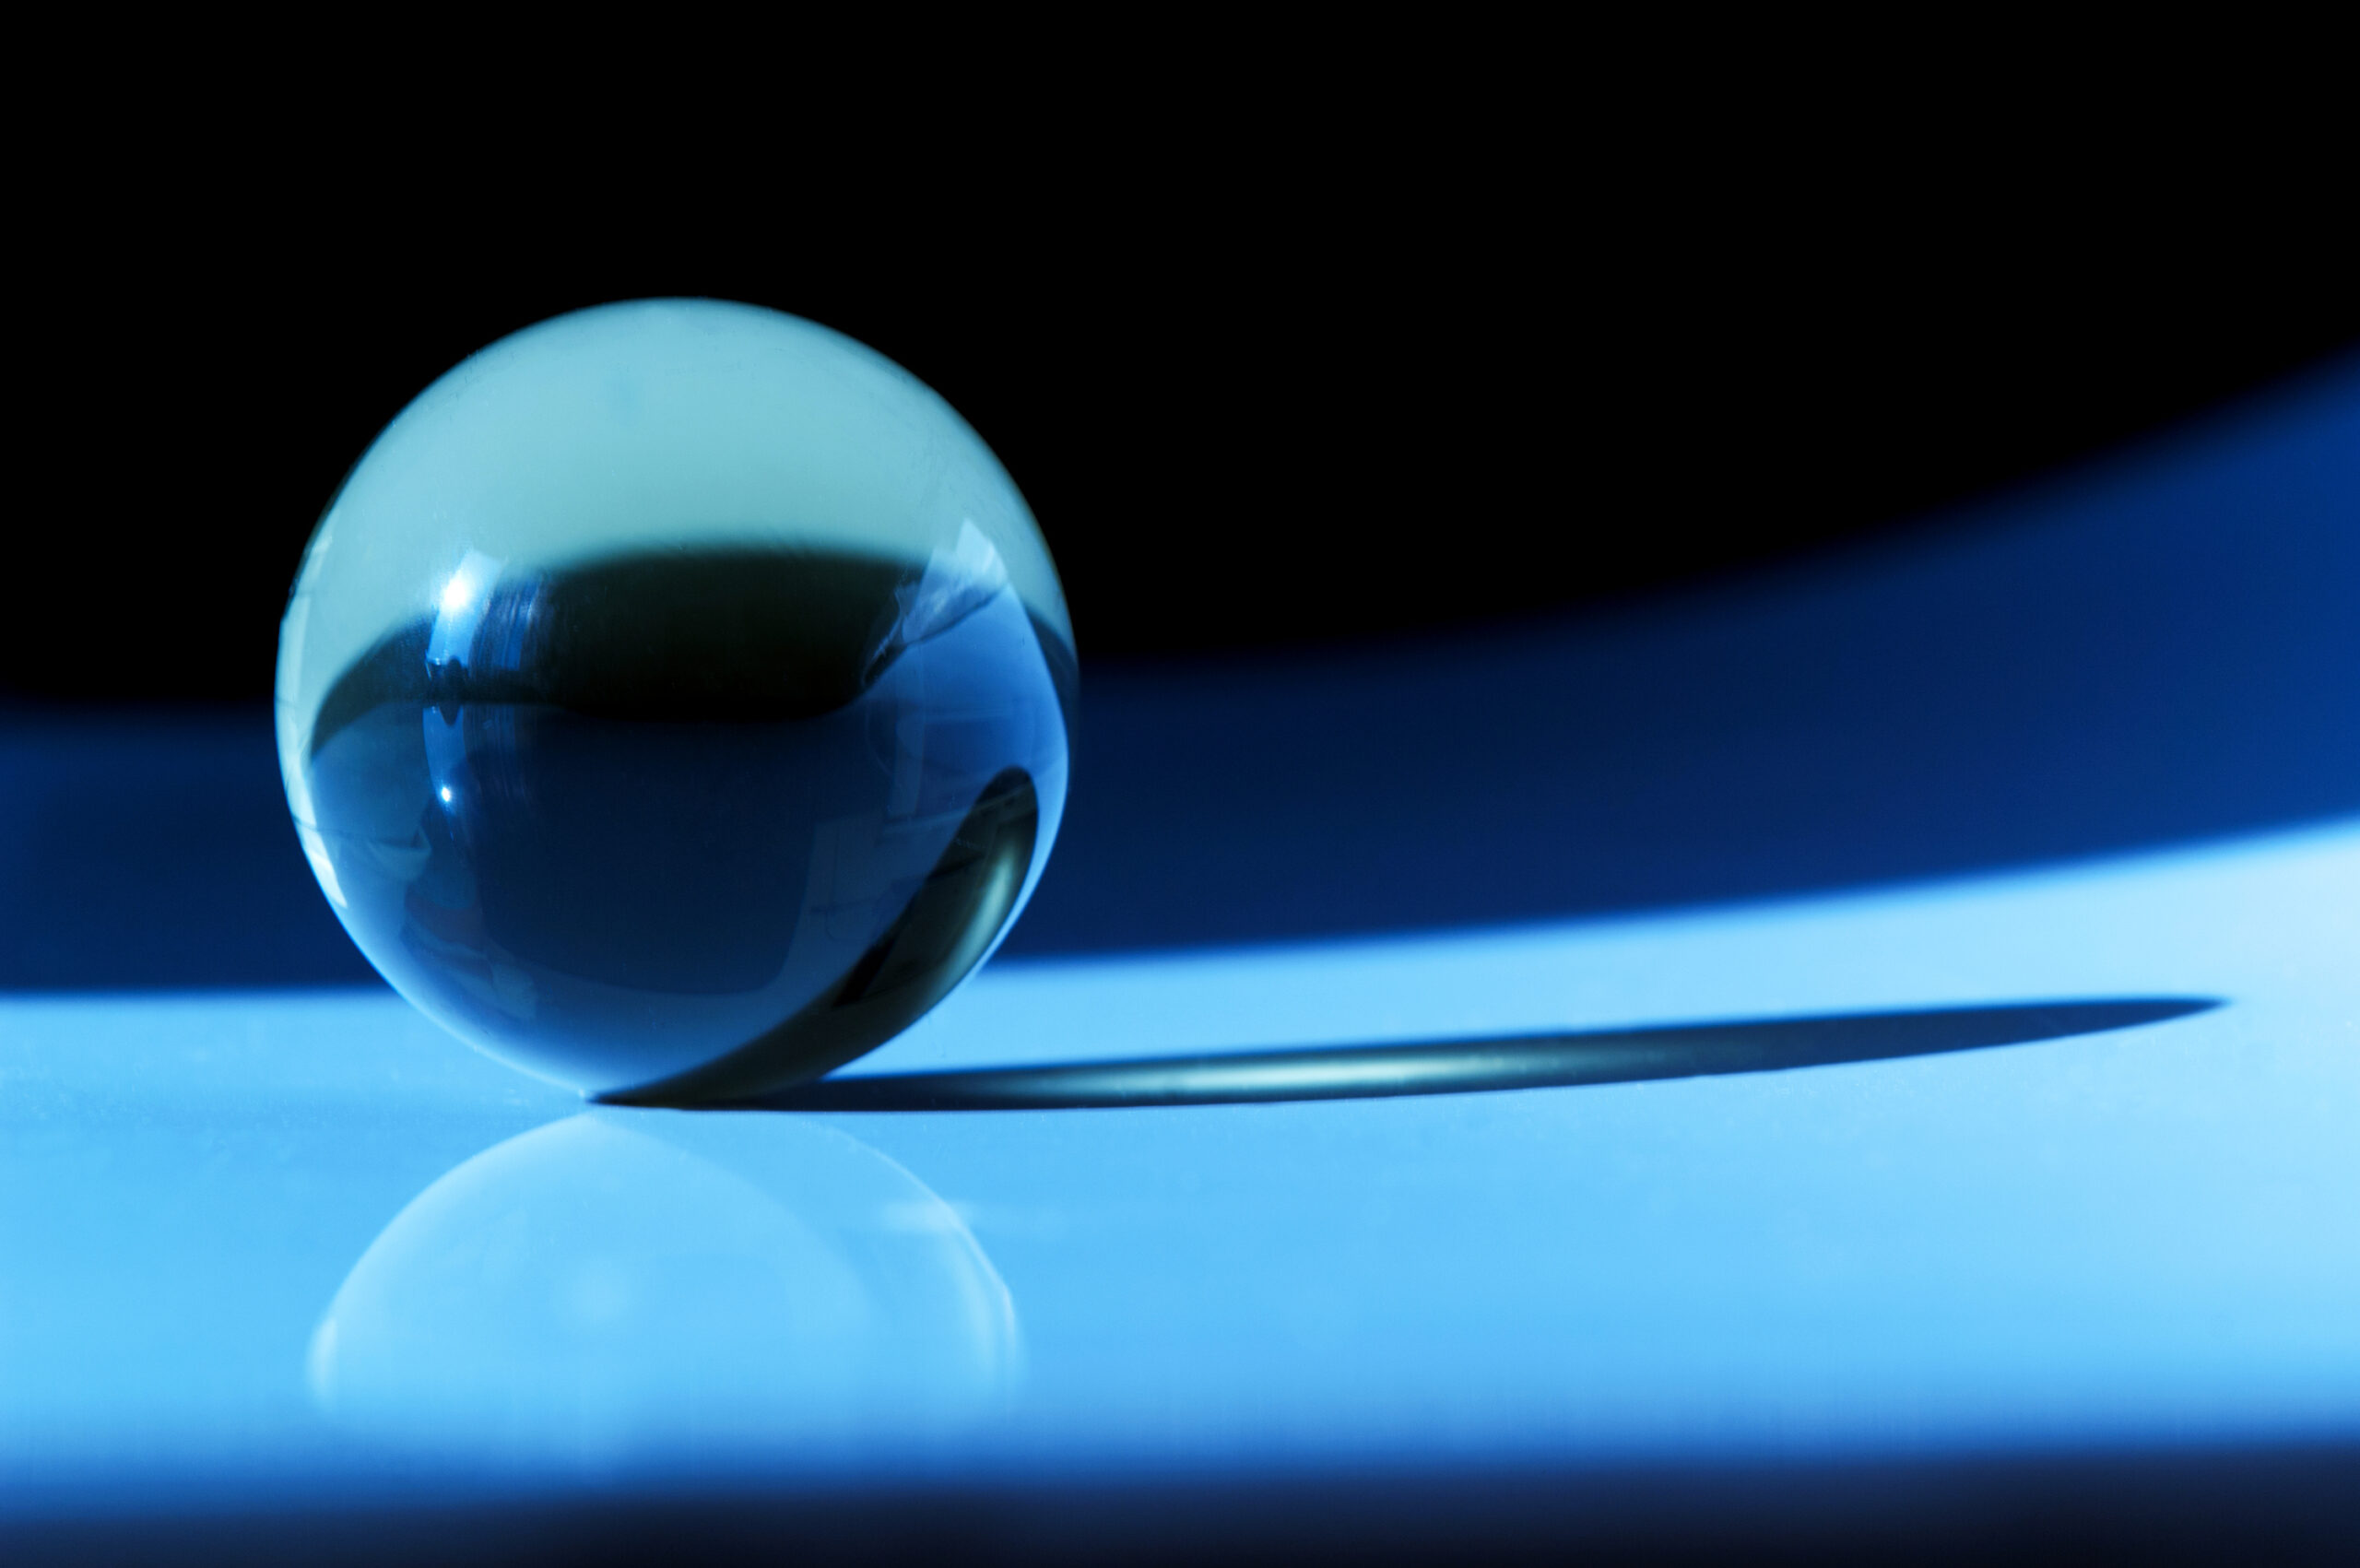 A photo of a crystal ball sitting on a glossy light blue surface against a black background.